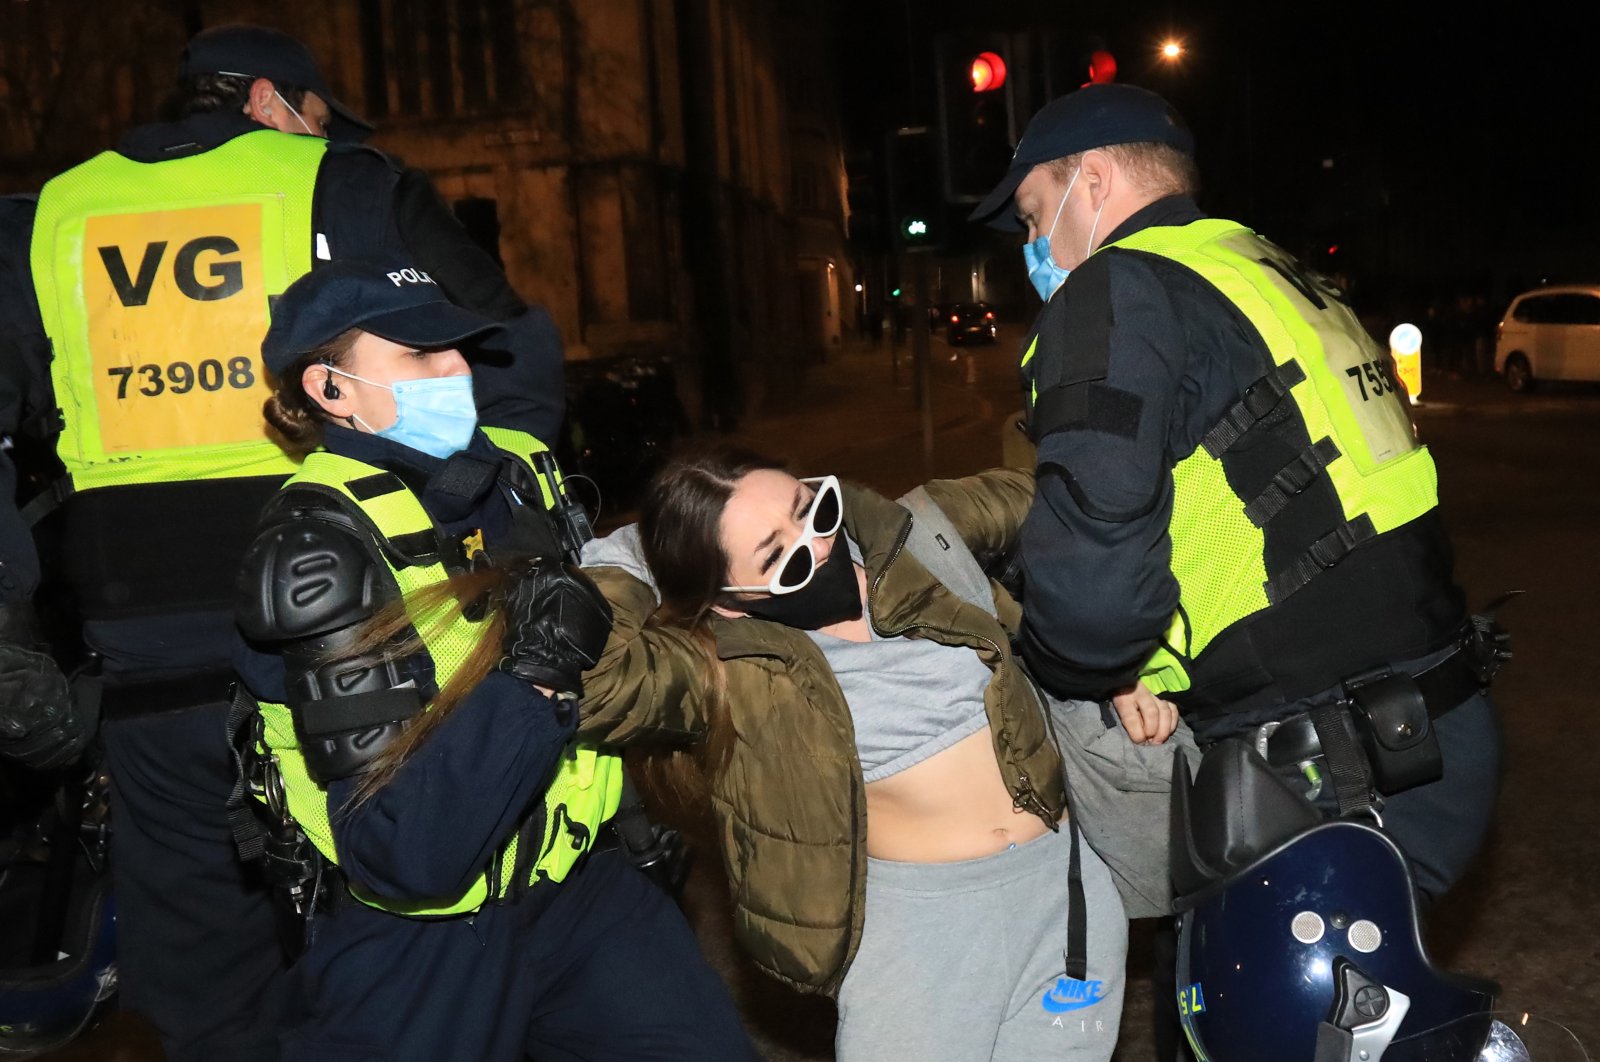 Police arrest protesters who refuse to disperse after at the latest "Kill The Bill" protest against the government's Police, Crime, Sentencing and Courts Bill, in Bristol, England, April 03, 2021. (EPA Photo)